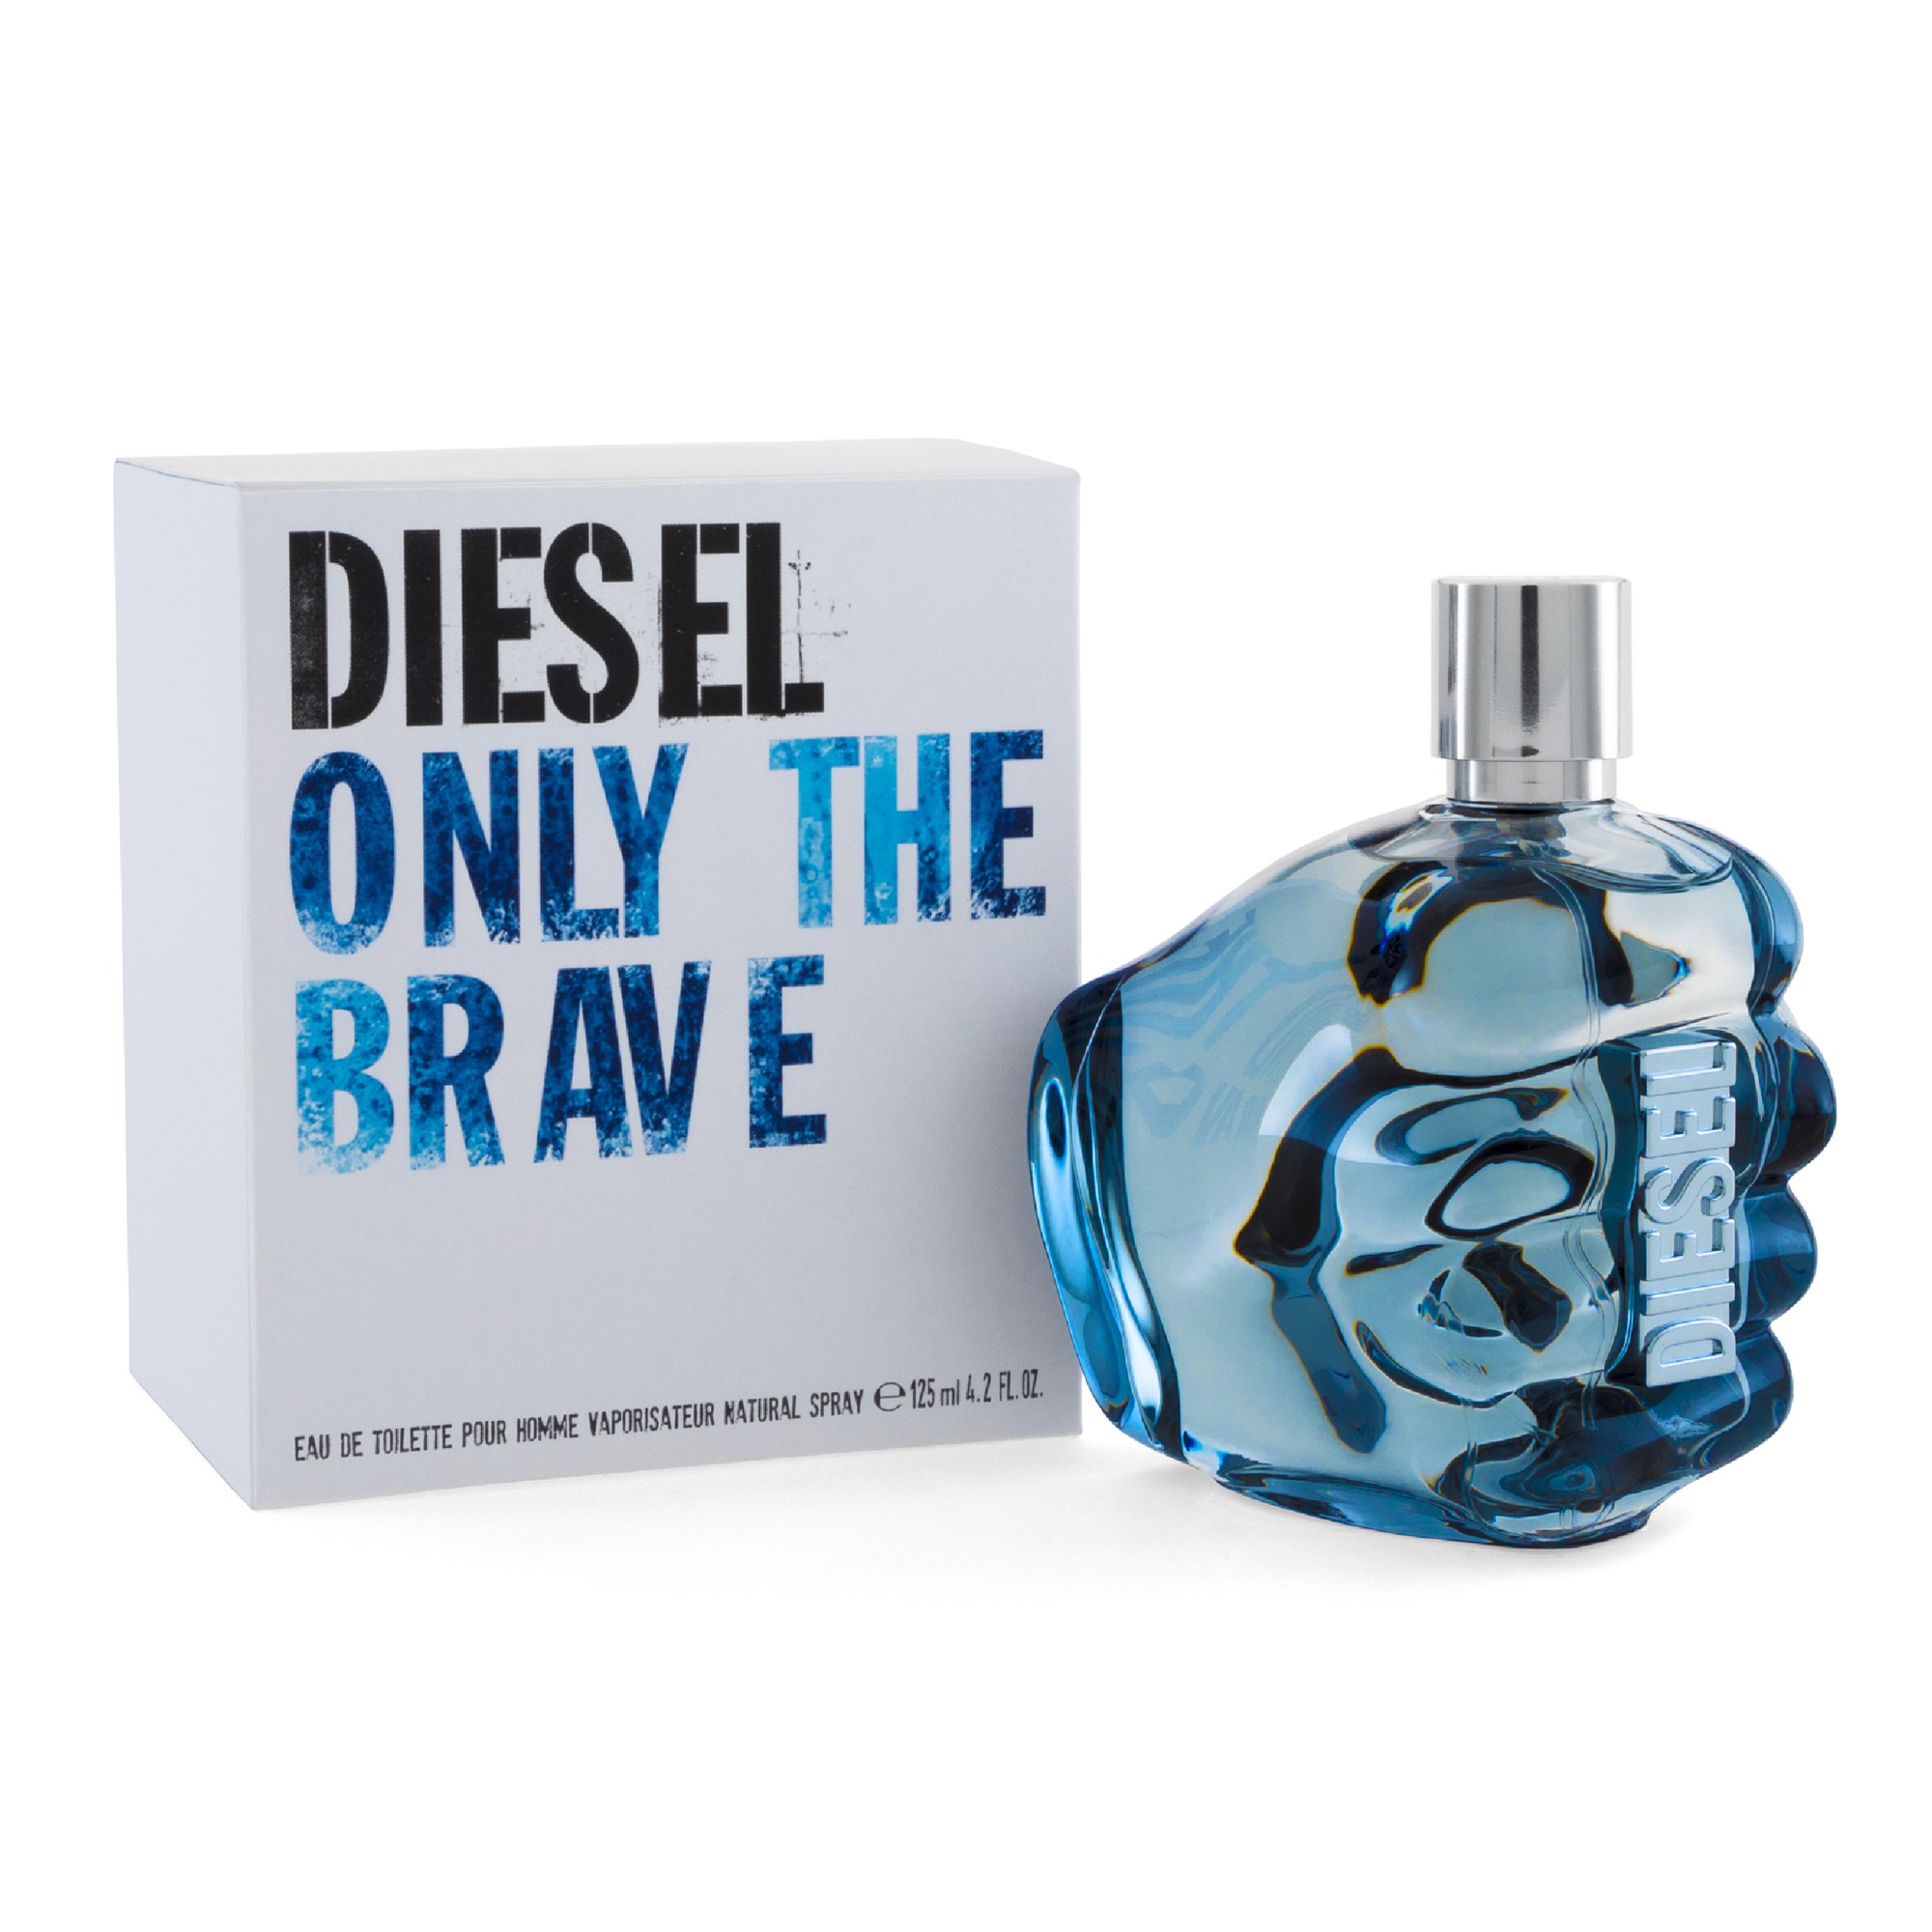 ONLY THE BRAVE 125ML TOILETTE CABALLERO